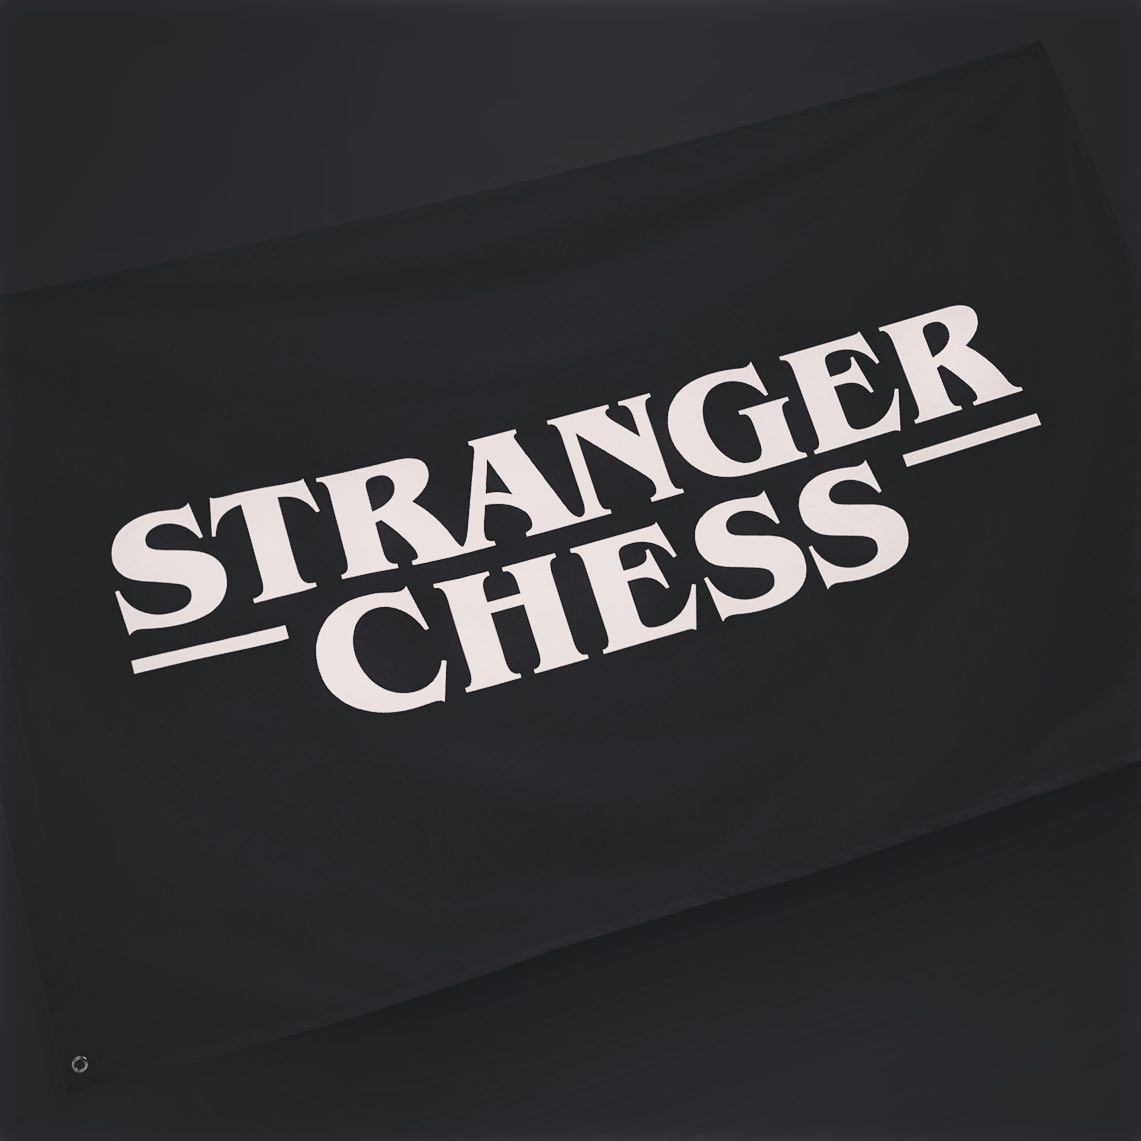 StrangerChess — a flag with the logo on it